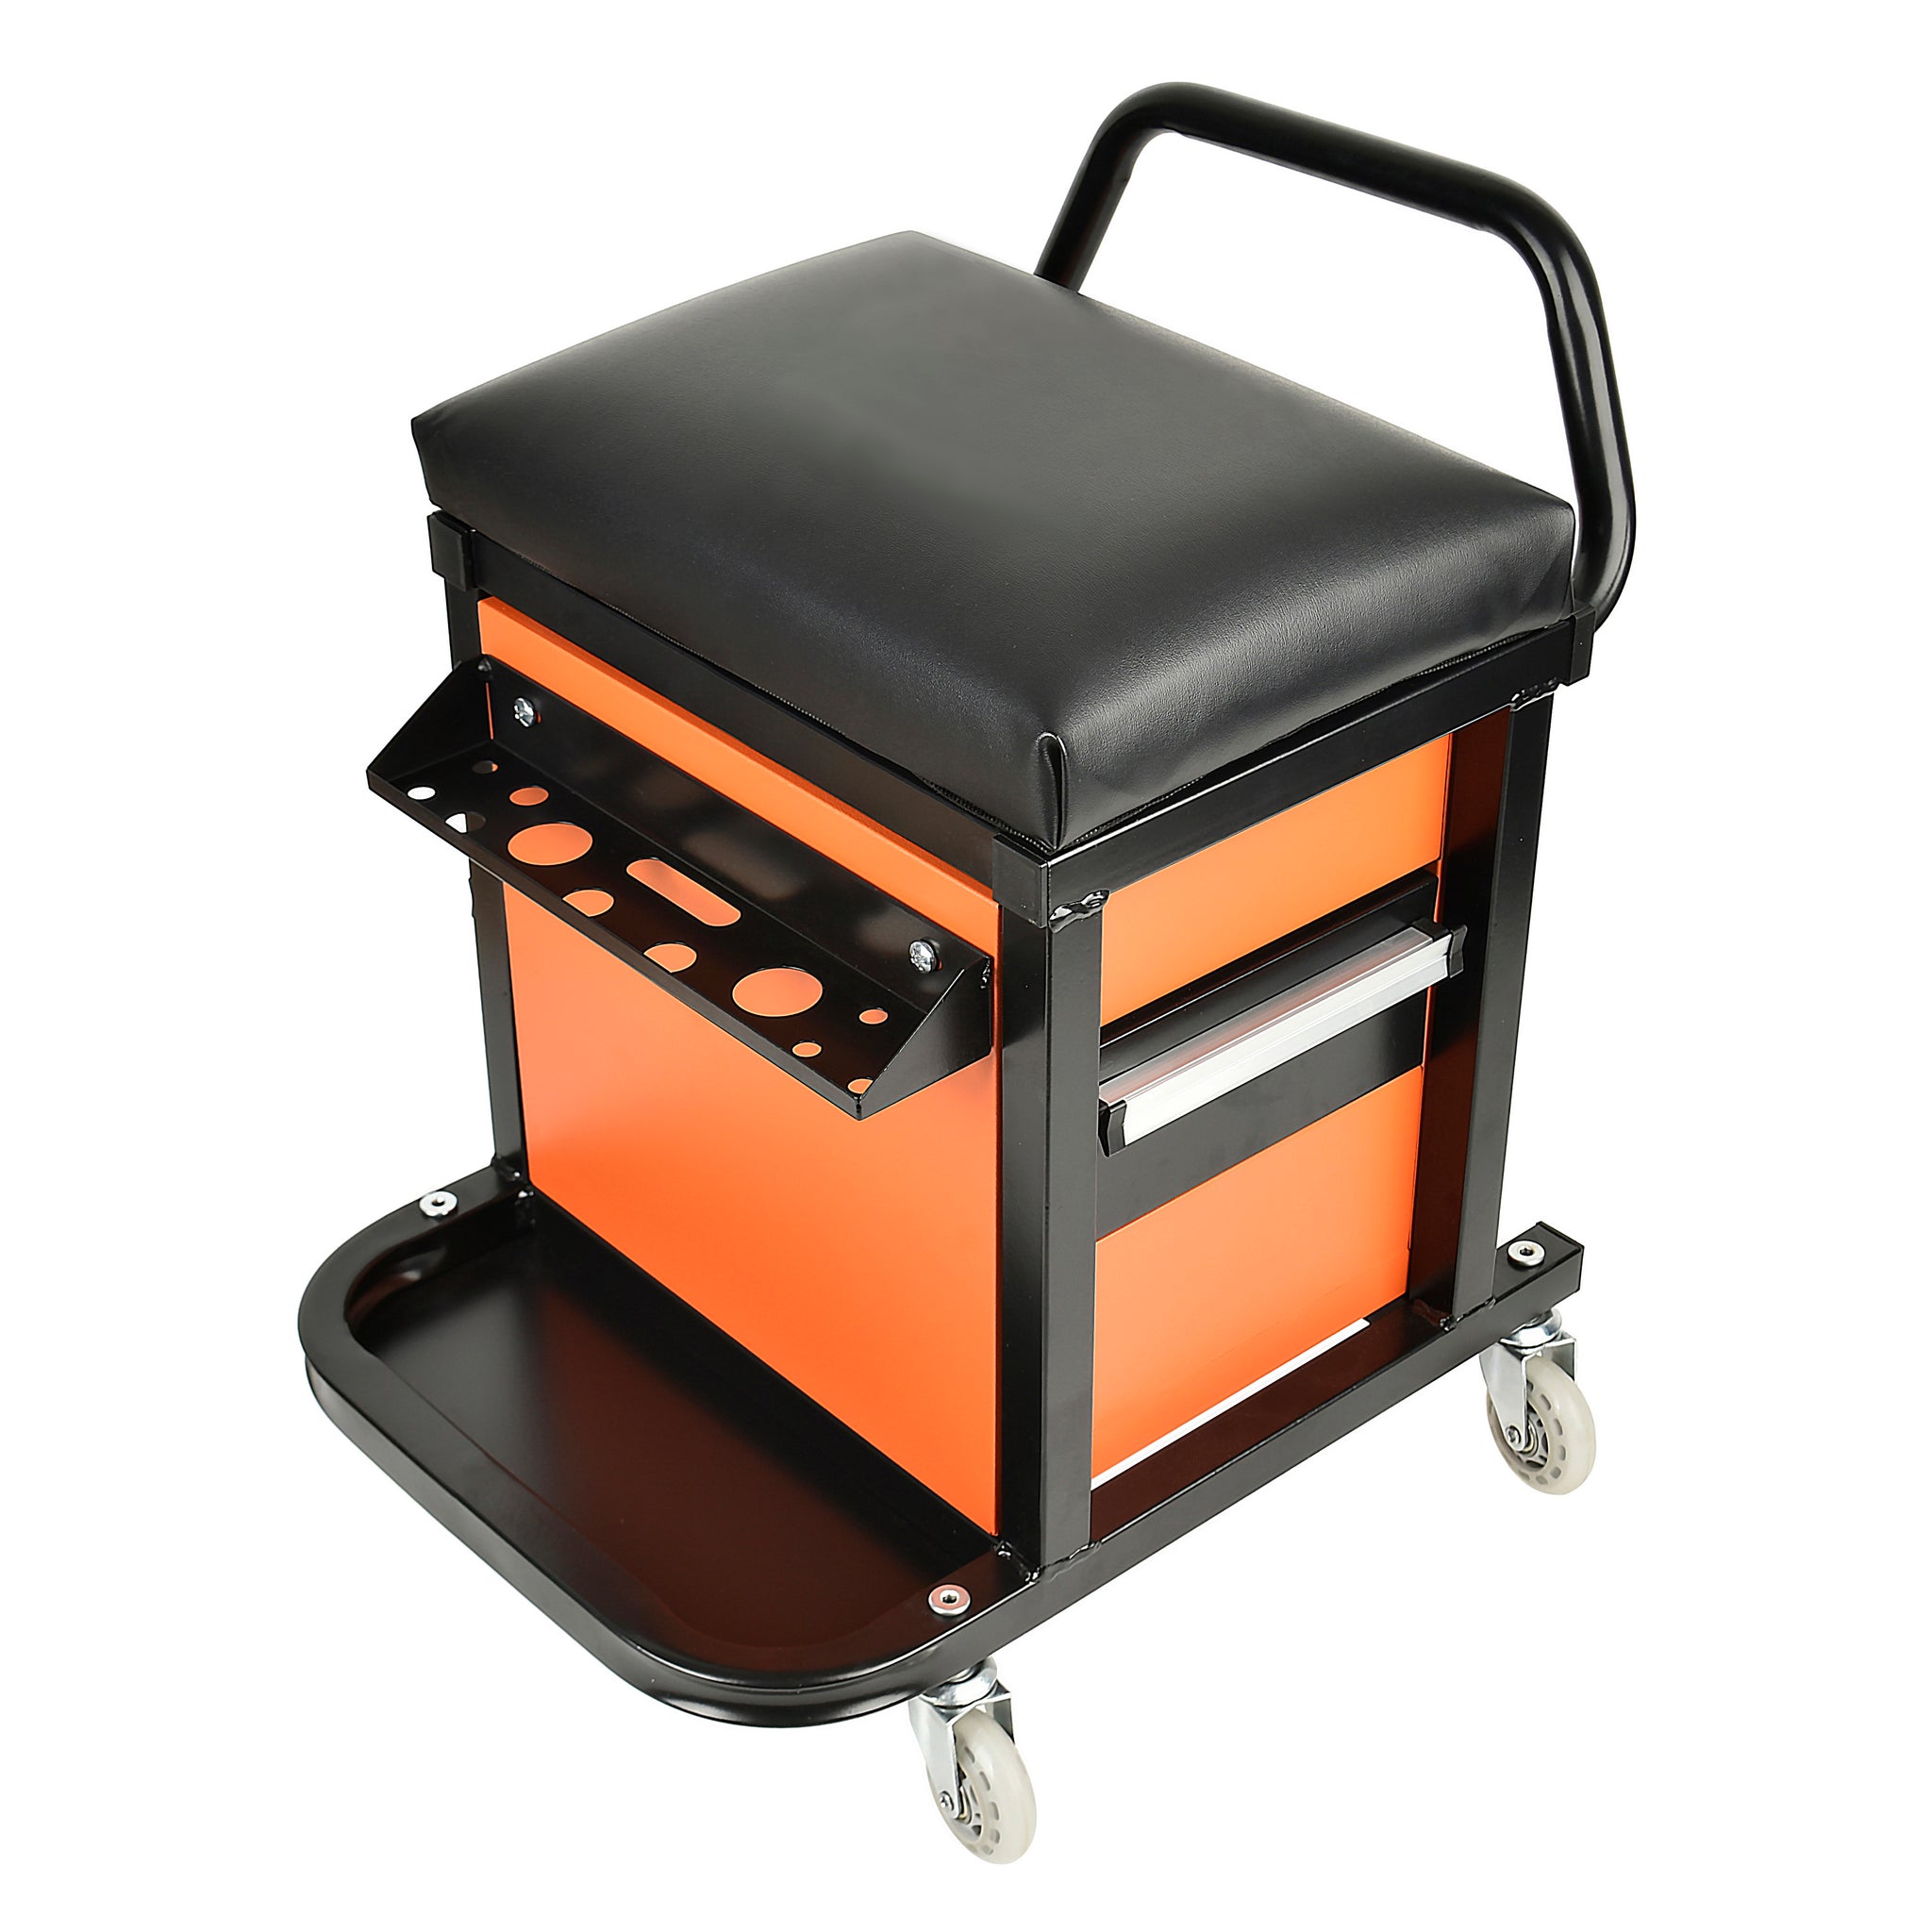 AA041 Padded Creeper Seat with Extra Storage, 300 lbs capacity Mechanics  Chair with drawers, Orange Tool Box Chair Swivel Casters – Autospecialtools